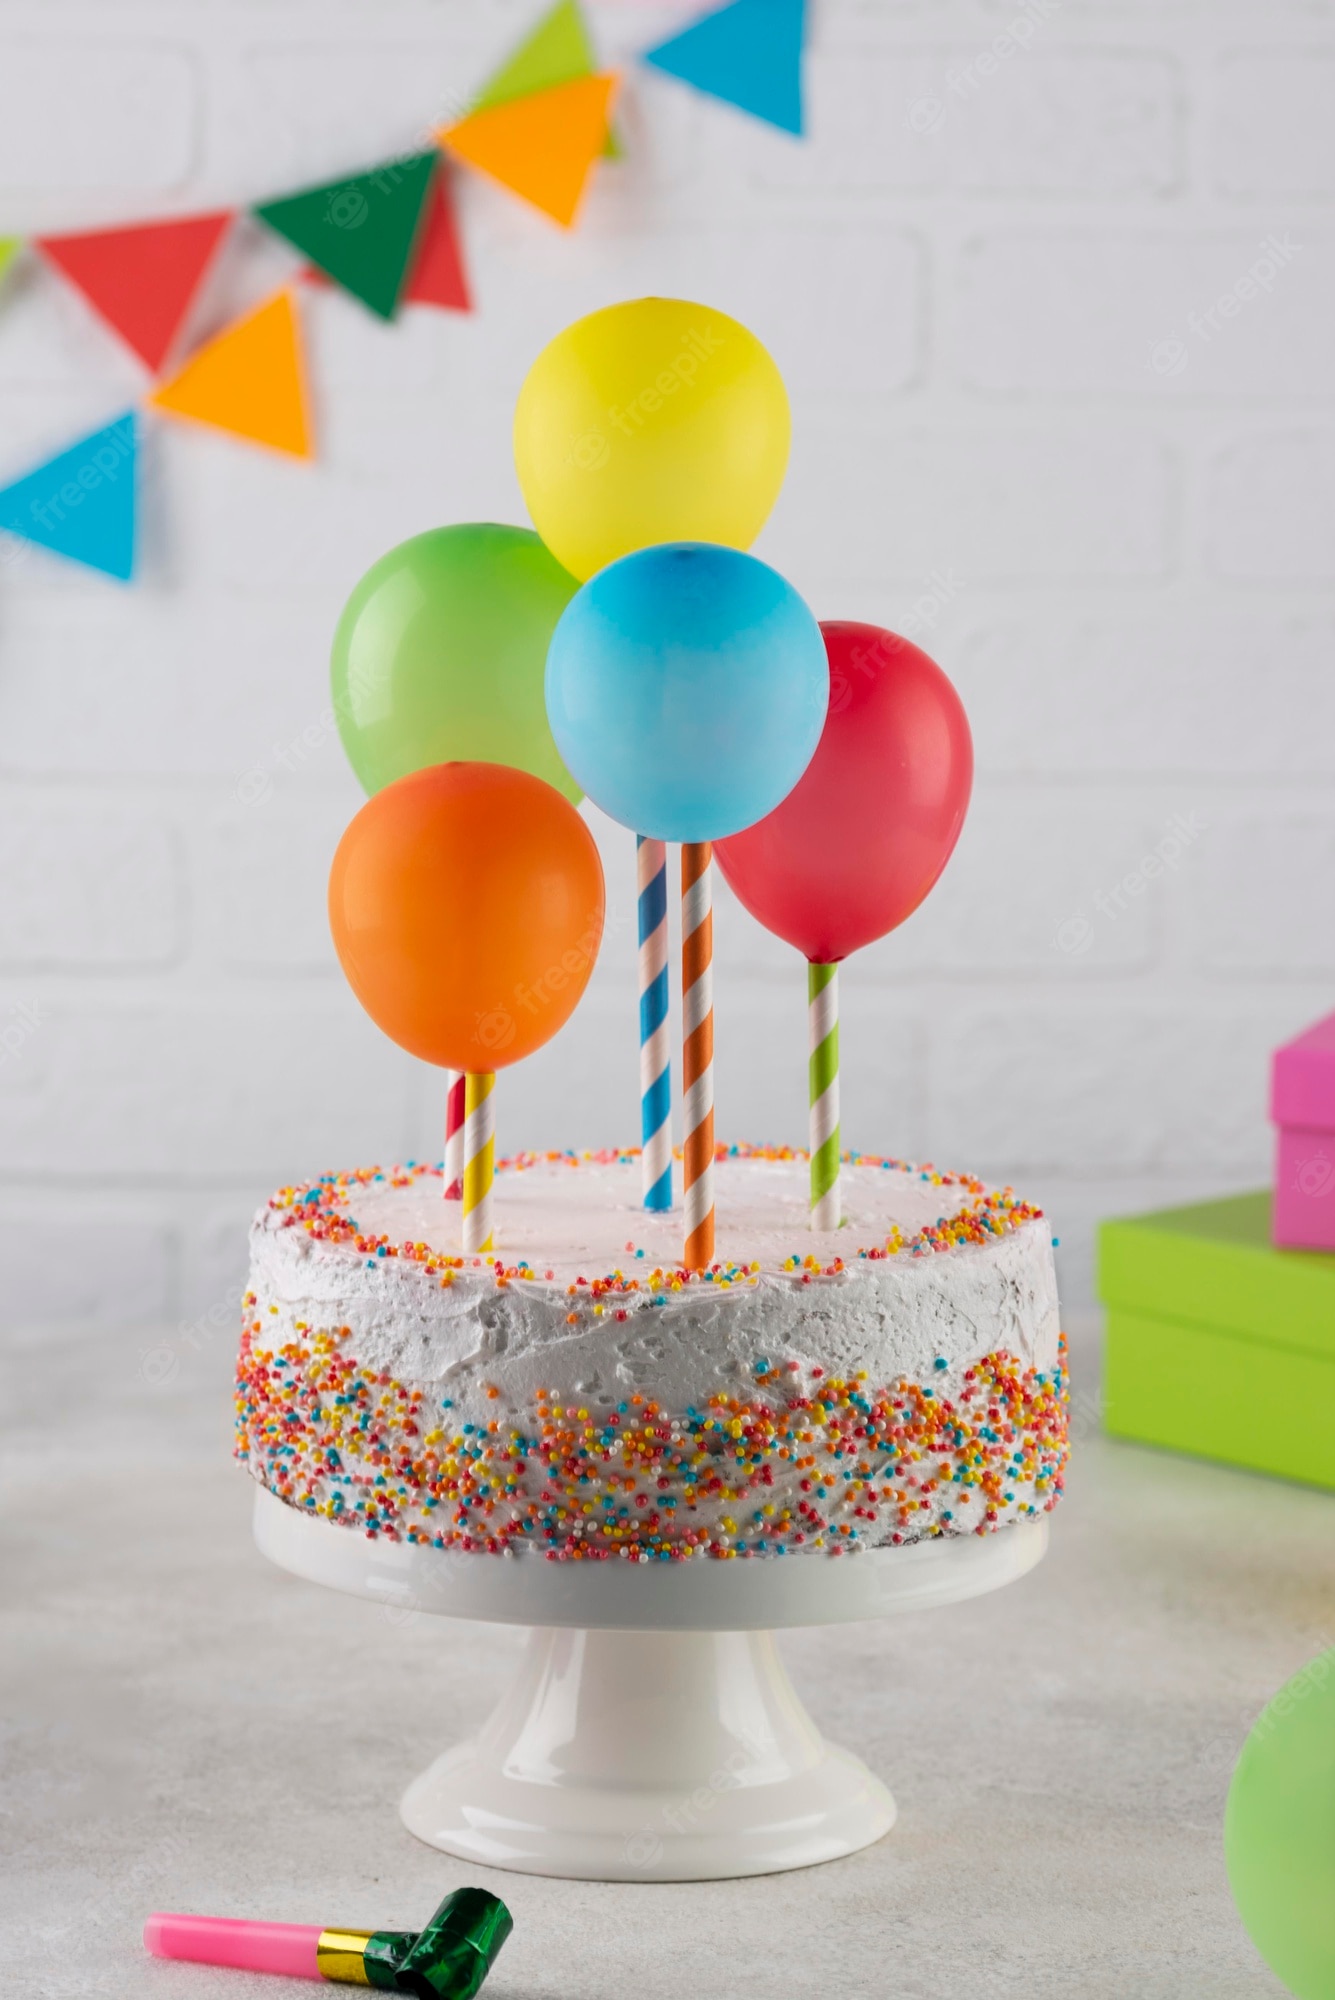 Delicious cake with colorful balloons decorations